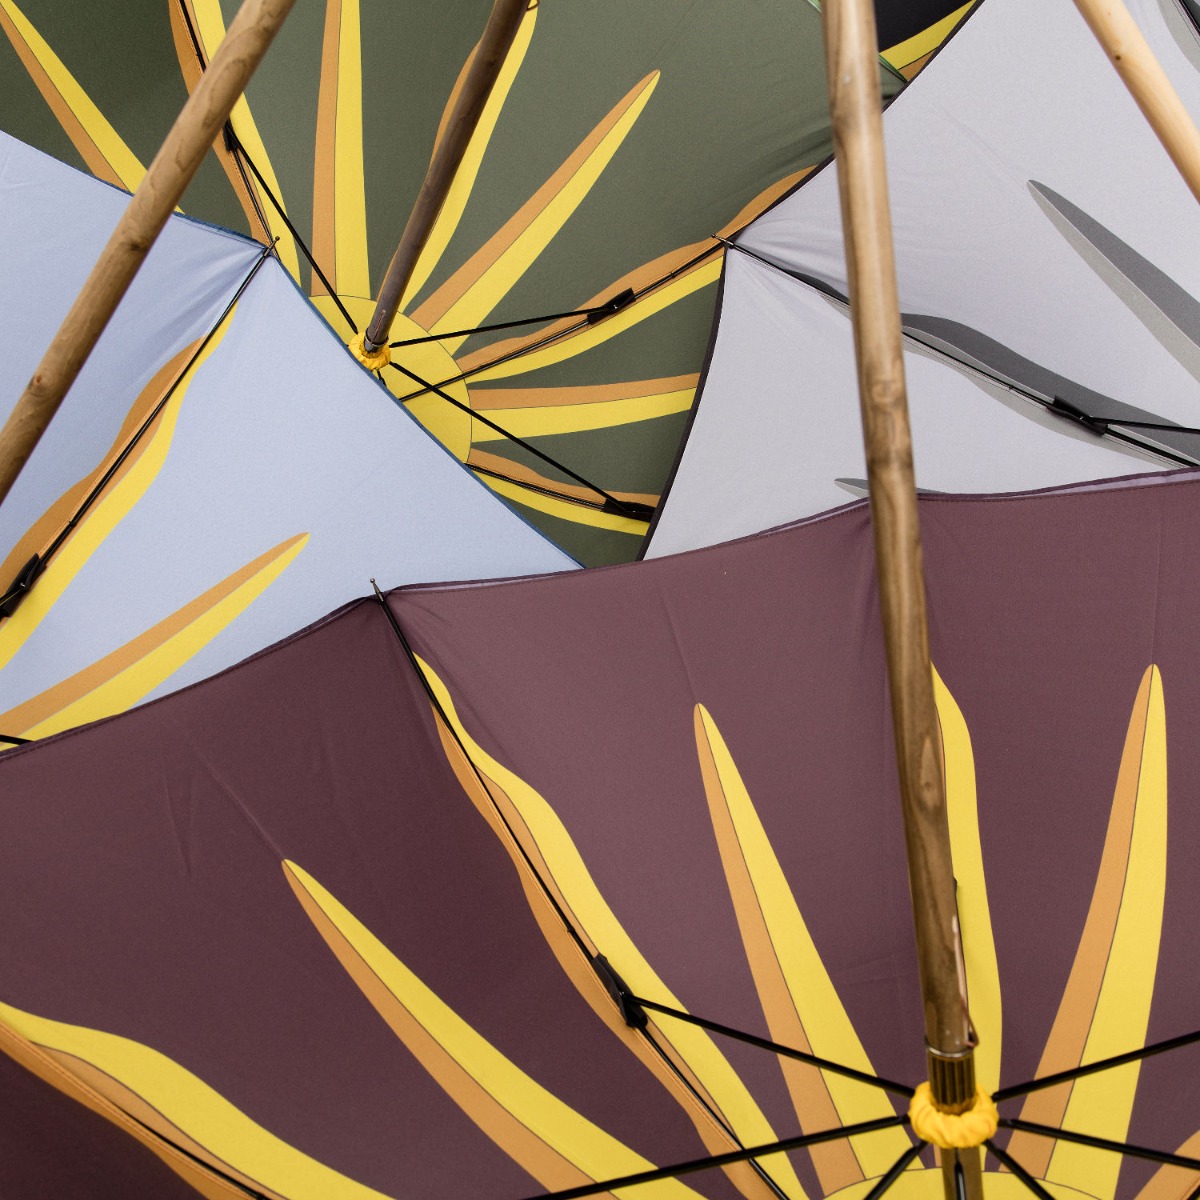 Four open umbrellas overlapping each other. They are in green, grey, pale blue and burgundy with a sunburst print. 